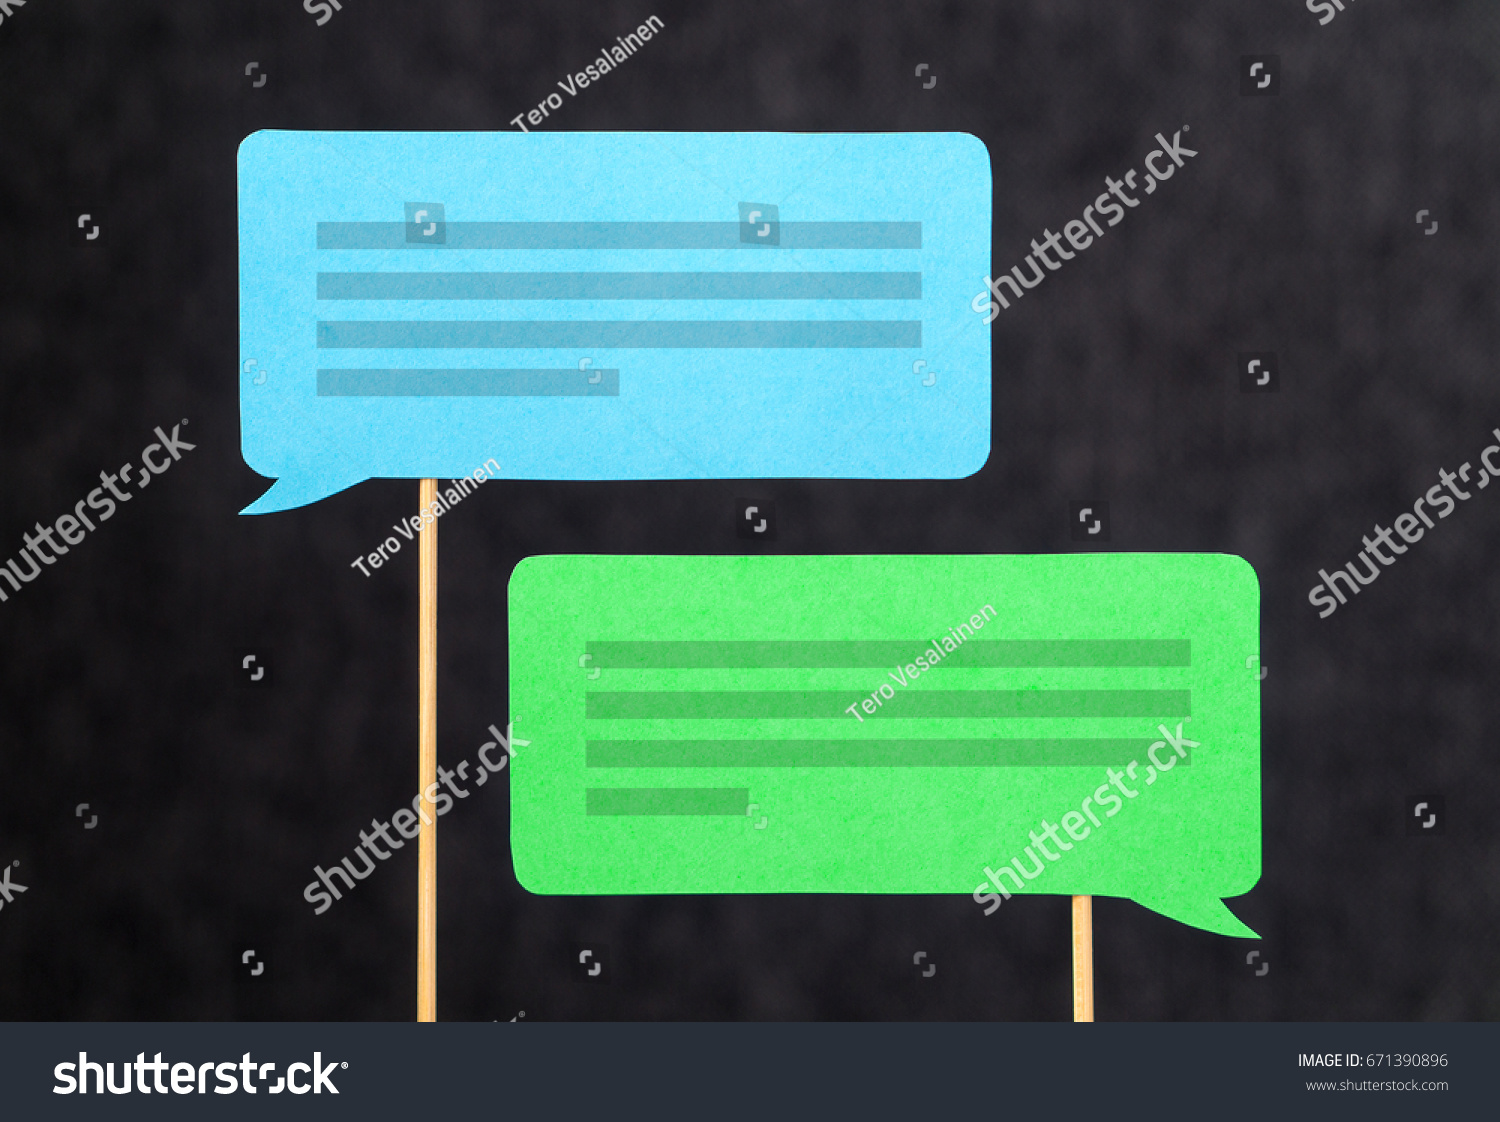 2 chat bubbles and speech balloons having discussion. Modern communication and conversation concept. Mobile and smartphone communication design made from cardboard and wooden stick. #671390896